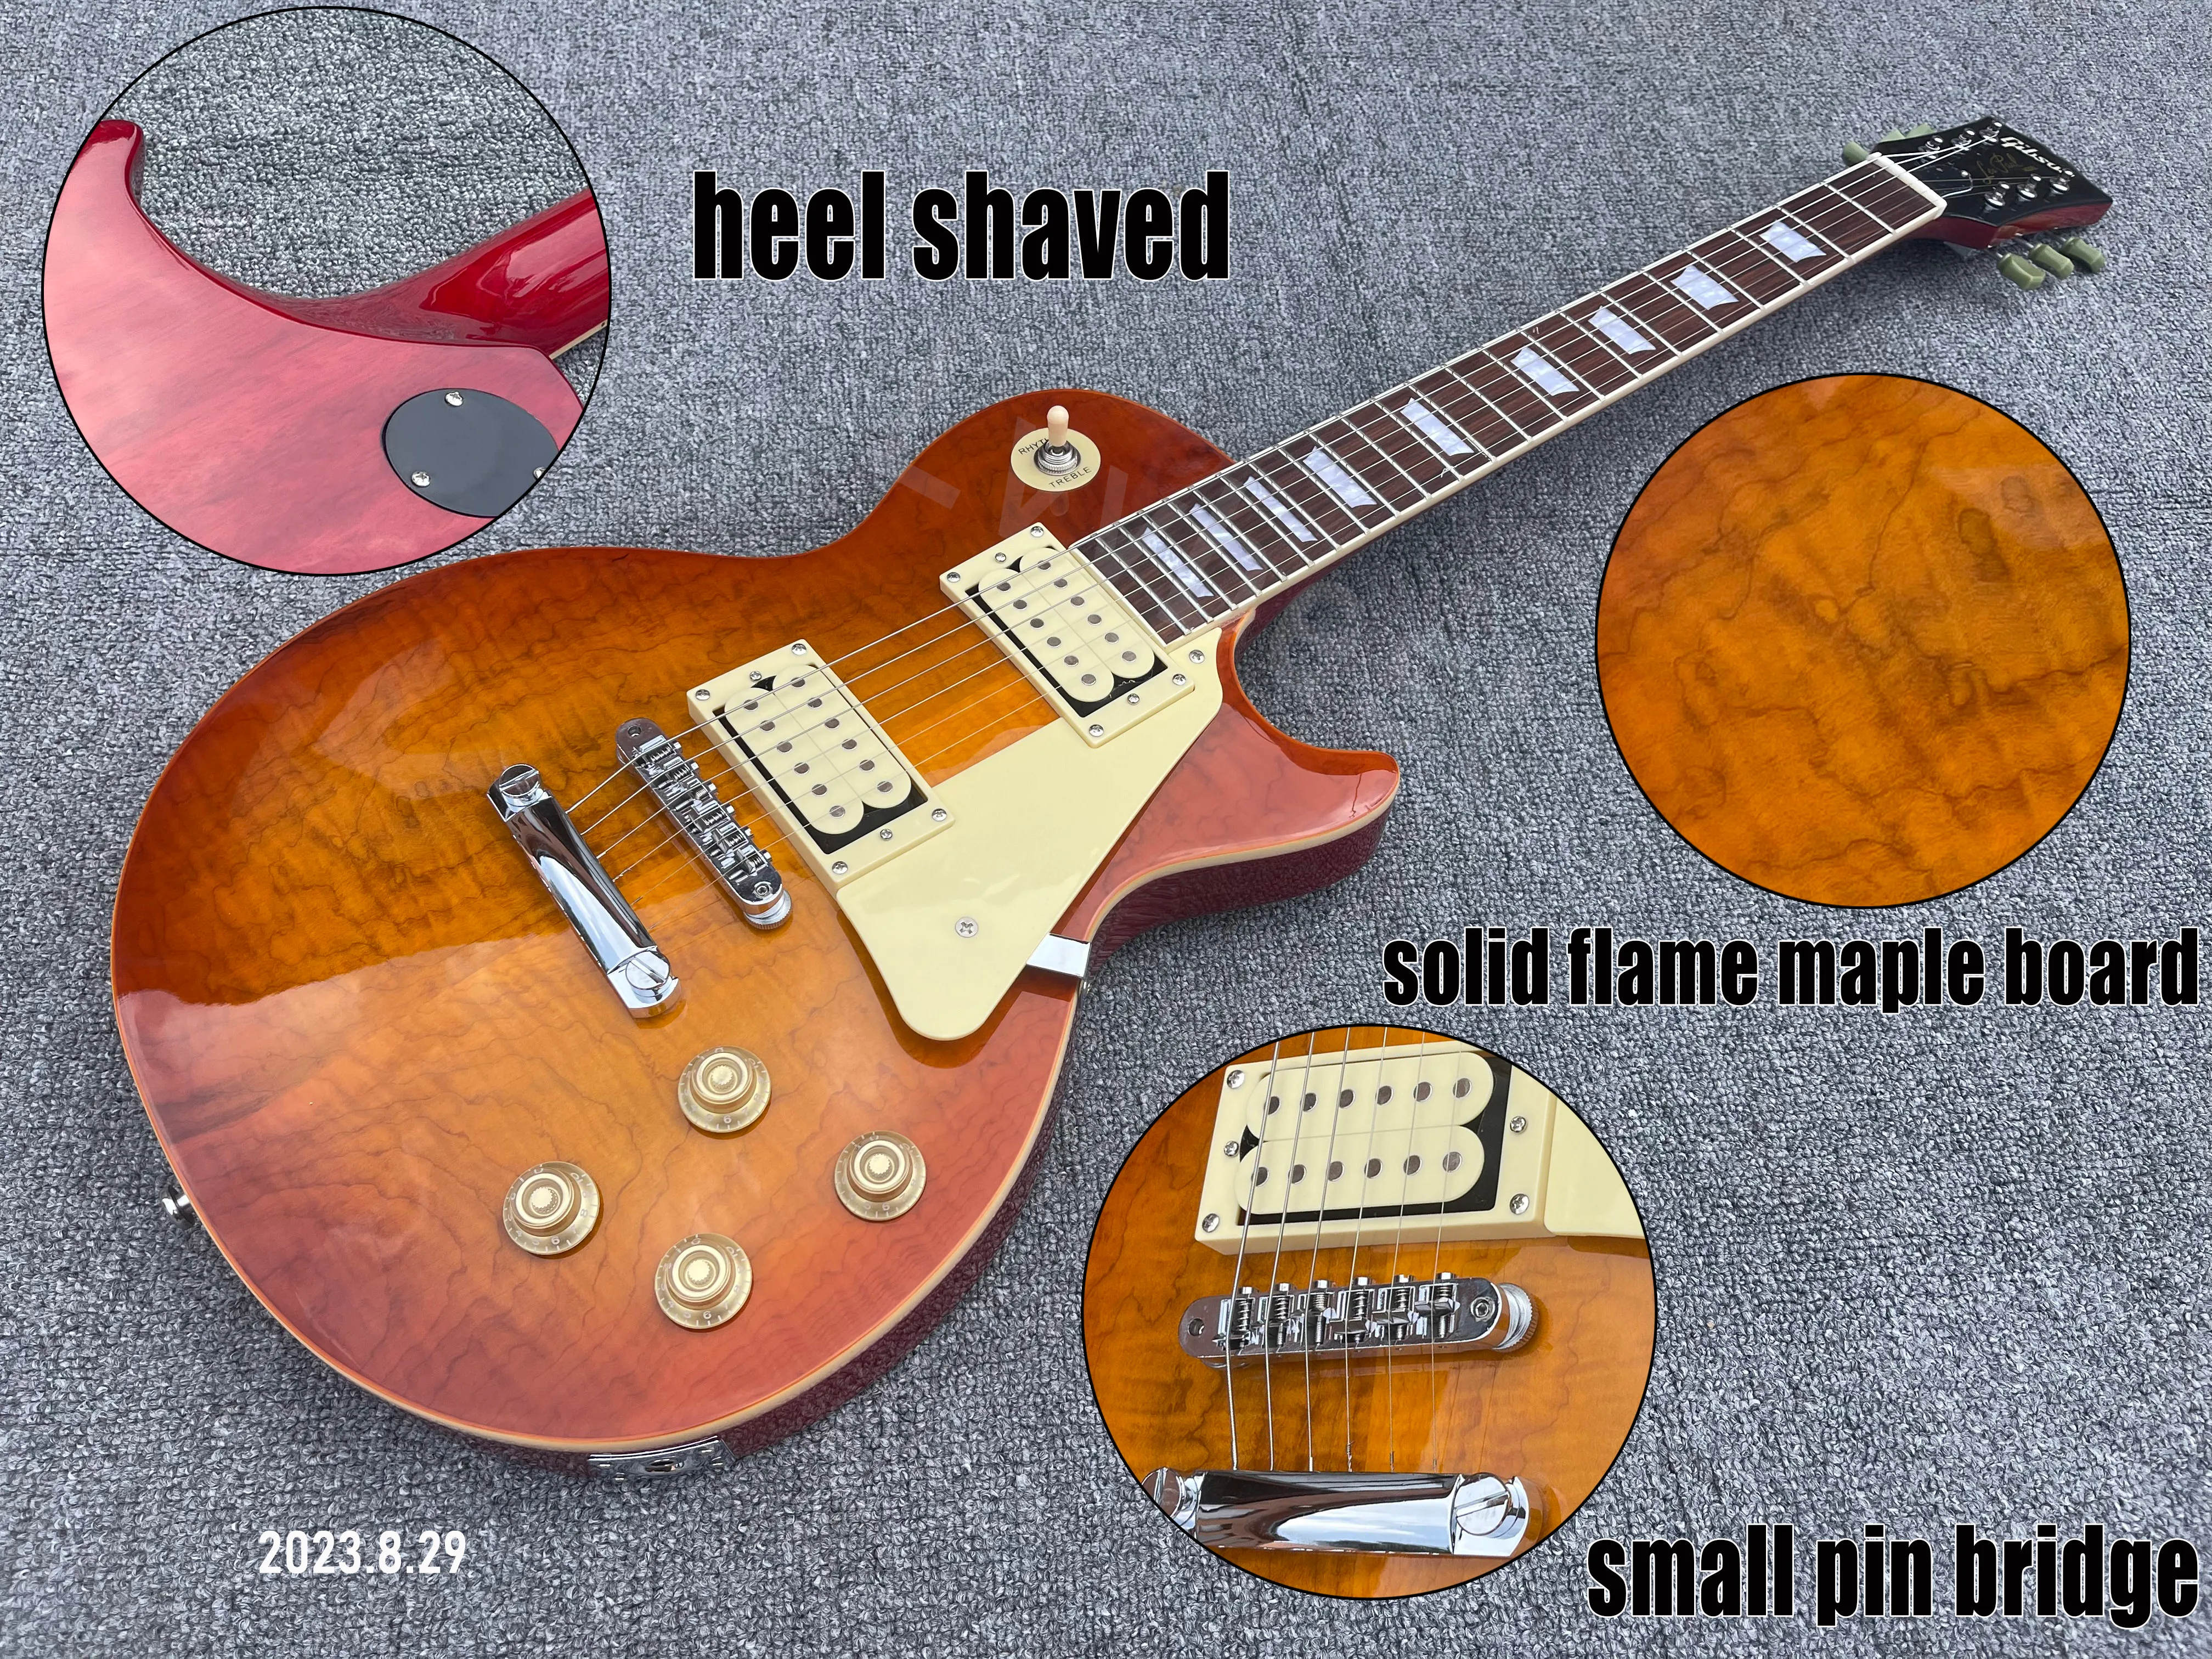 Electric guitar solid flame maple board honey burst HH pickups small pin bridge bone nut heel shaved chrome parts